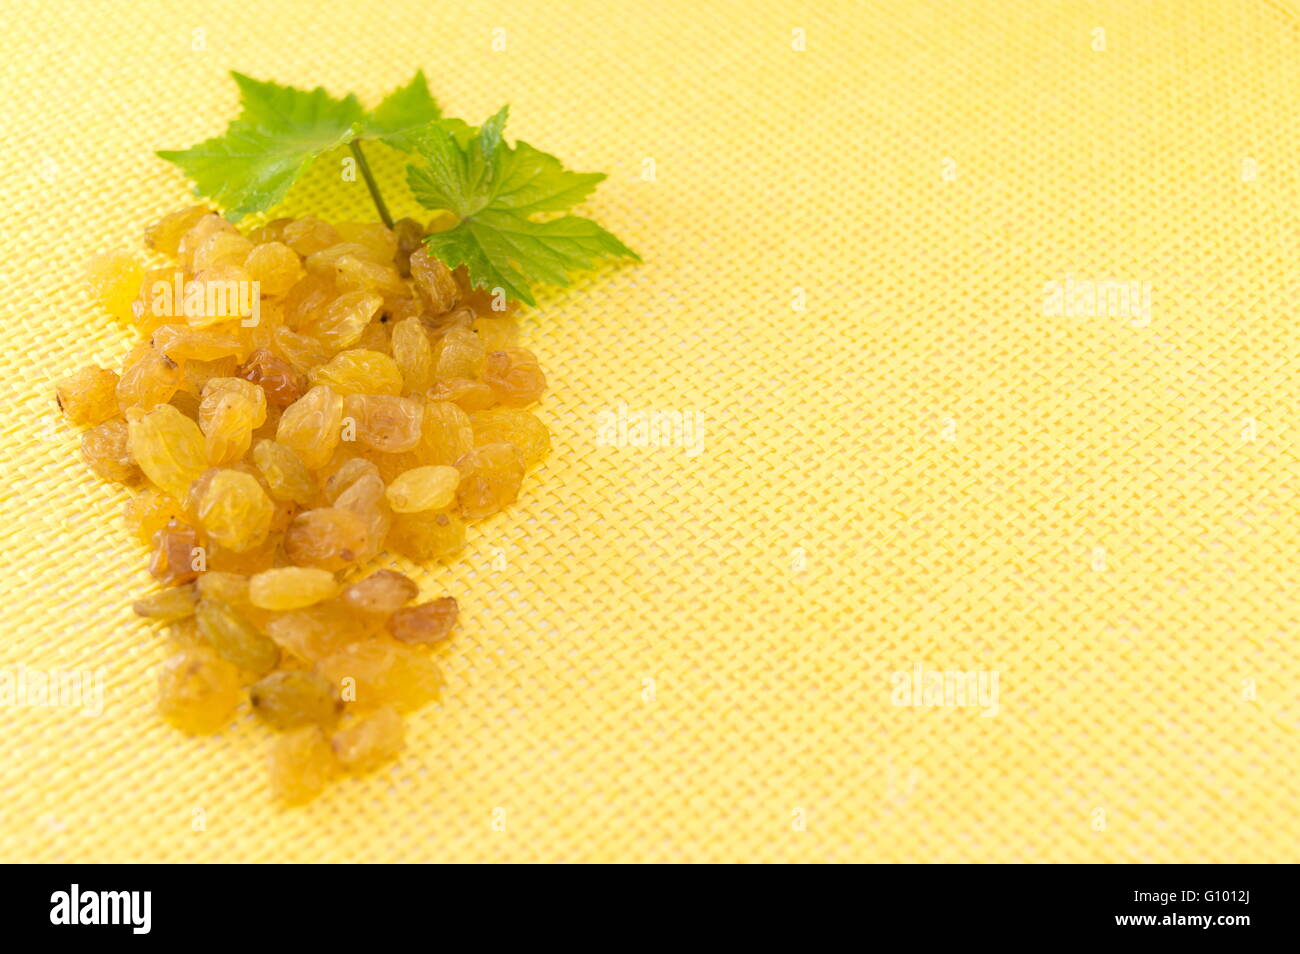 Raisins forming a grape cluster on yellow background Stock Photo